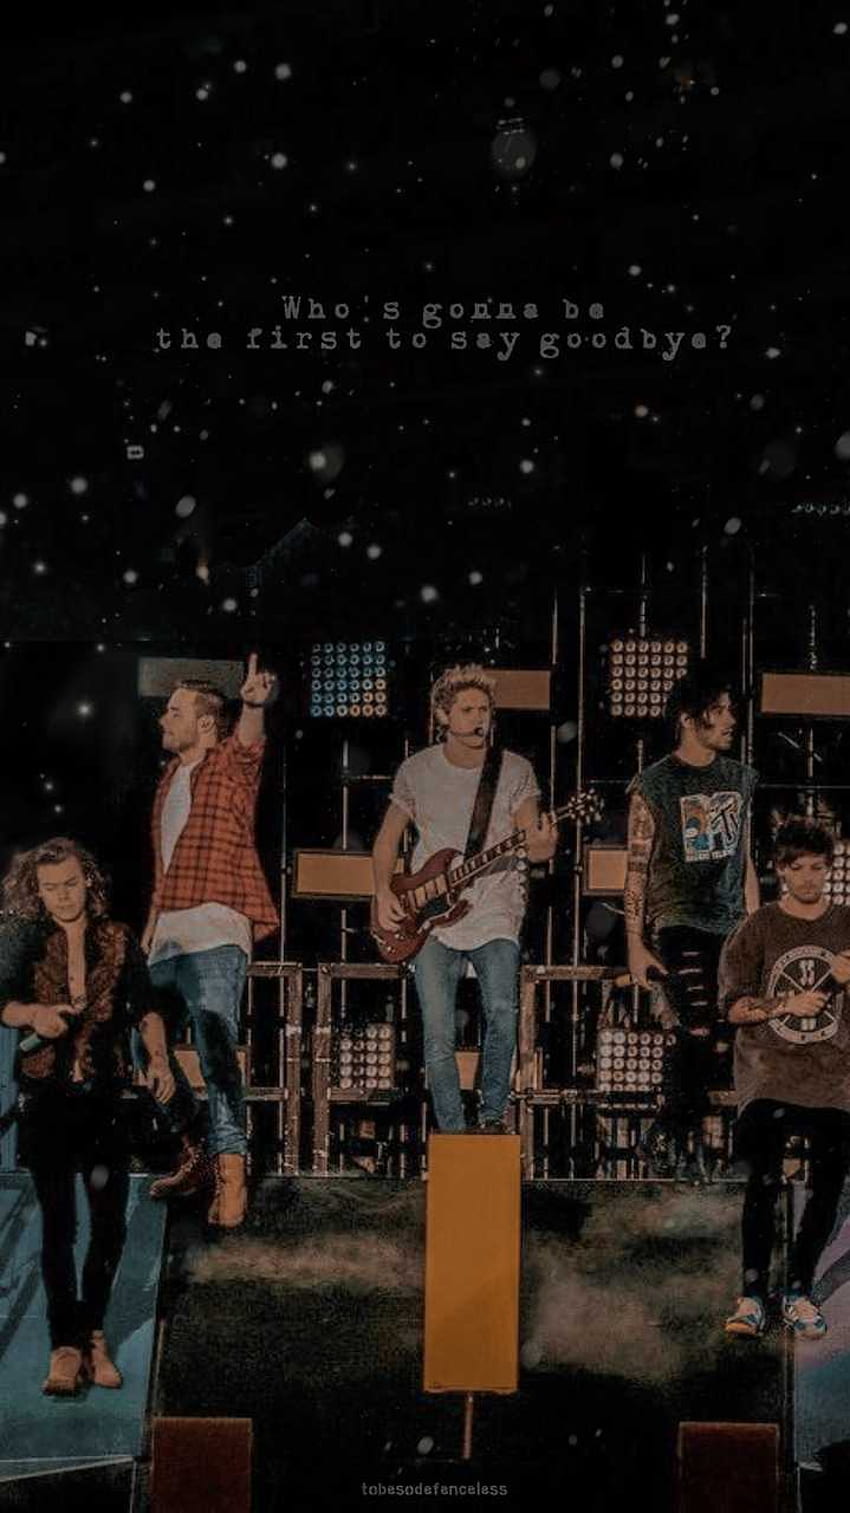 One Direction, One Direction Concert HD phone wallpaper